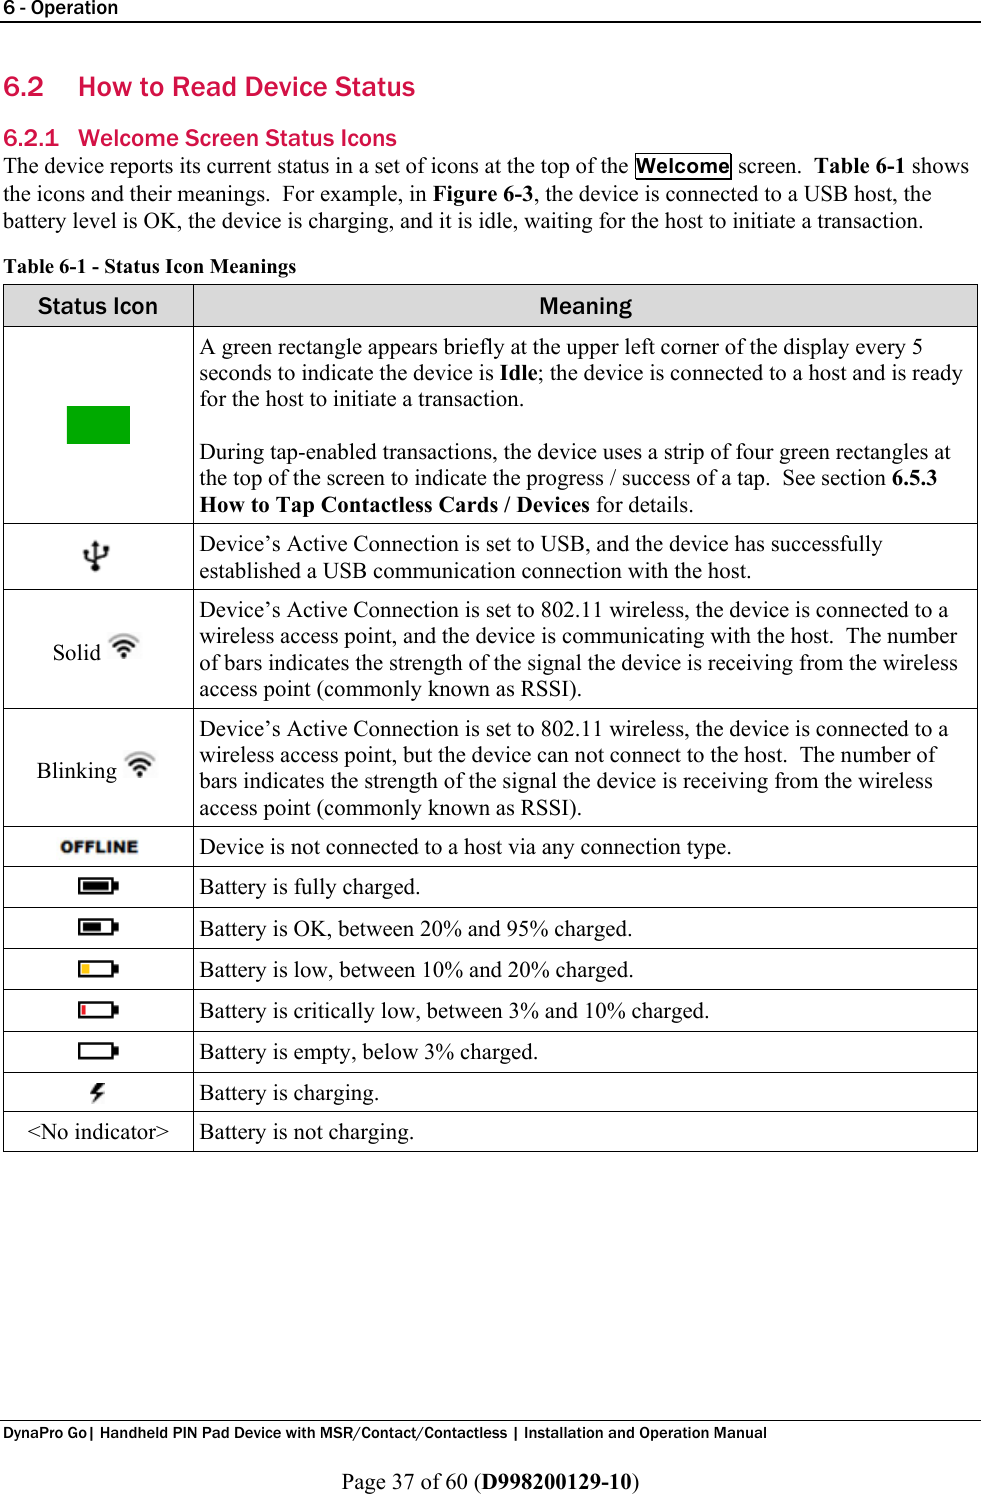 6 - Operation  DynaPro Go| Handheld PIN Pad Device with MSR/Contact/Contactless | Installation and Operation Manual  Page 37 of 60 (D998200129-10) 6.2 How to Read Device Status 6.2.1 Welcome Screen Status Icons The device reports its current status in a set of icons at the top of the Welcome screen.  Table 6-1 shows the icons and their meanings.  For example, in Figure 6-3, the device is connected to a USB host, the battery level is OK, the device is charging, and it is idle, waiting for the host to initiate a transaction. Table 6-1 - Status Icon Meanings Status Icon Meaning  A green rectangle appears briefly at the upper left corner of the display every 5 seconds to indicate the device is Idle; the device is connected to a host and is ready for the host to initiate a transaction.  During tap-enabled transactions, the device uses a strip of four green rectangles at the top of the screen to indicate the progress / success of a tap.  See section 6.5.3 How to Tap Contactless Cards / Devices for details.  Device’s Active Connection is set to USB, and the device has successfully established a USB communication connection with the host. Solid   Device’s Active Connection is set to 802.11 wireless, the device is connected to a wireless access point, and the device is communicating with the host.  The number of bars indicates the strength of the signal the device is receiving from the wireless access point (commonly known as RSSI). Blinking   Device’s Active Connection is set to 802.11 wireless, the device is connected to a wireless access point, but the device can not connect to the host.  The number of bars indicates the strength of the signal the device is receiving from the wireless access point (commonly known as RSSI).  Device is not connected to a host via any connection type.  Battery is fully charged.  Battery is OK, between 20% and 95% charged.  Battery is low, between 10% and 20% charged.  Battery is critically low, between 3% and 10% charged.  Battery is empty, below 3% charged.  Battery is charging. &lt;No indicator&gt; Battery is not charging. 